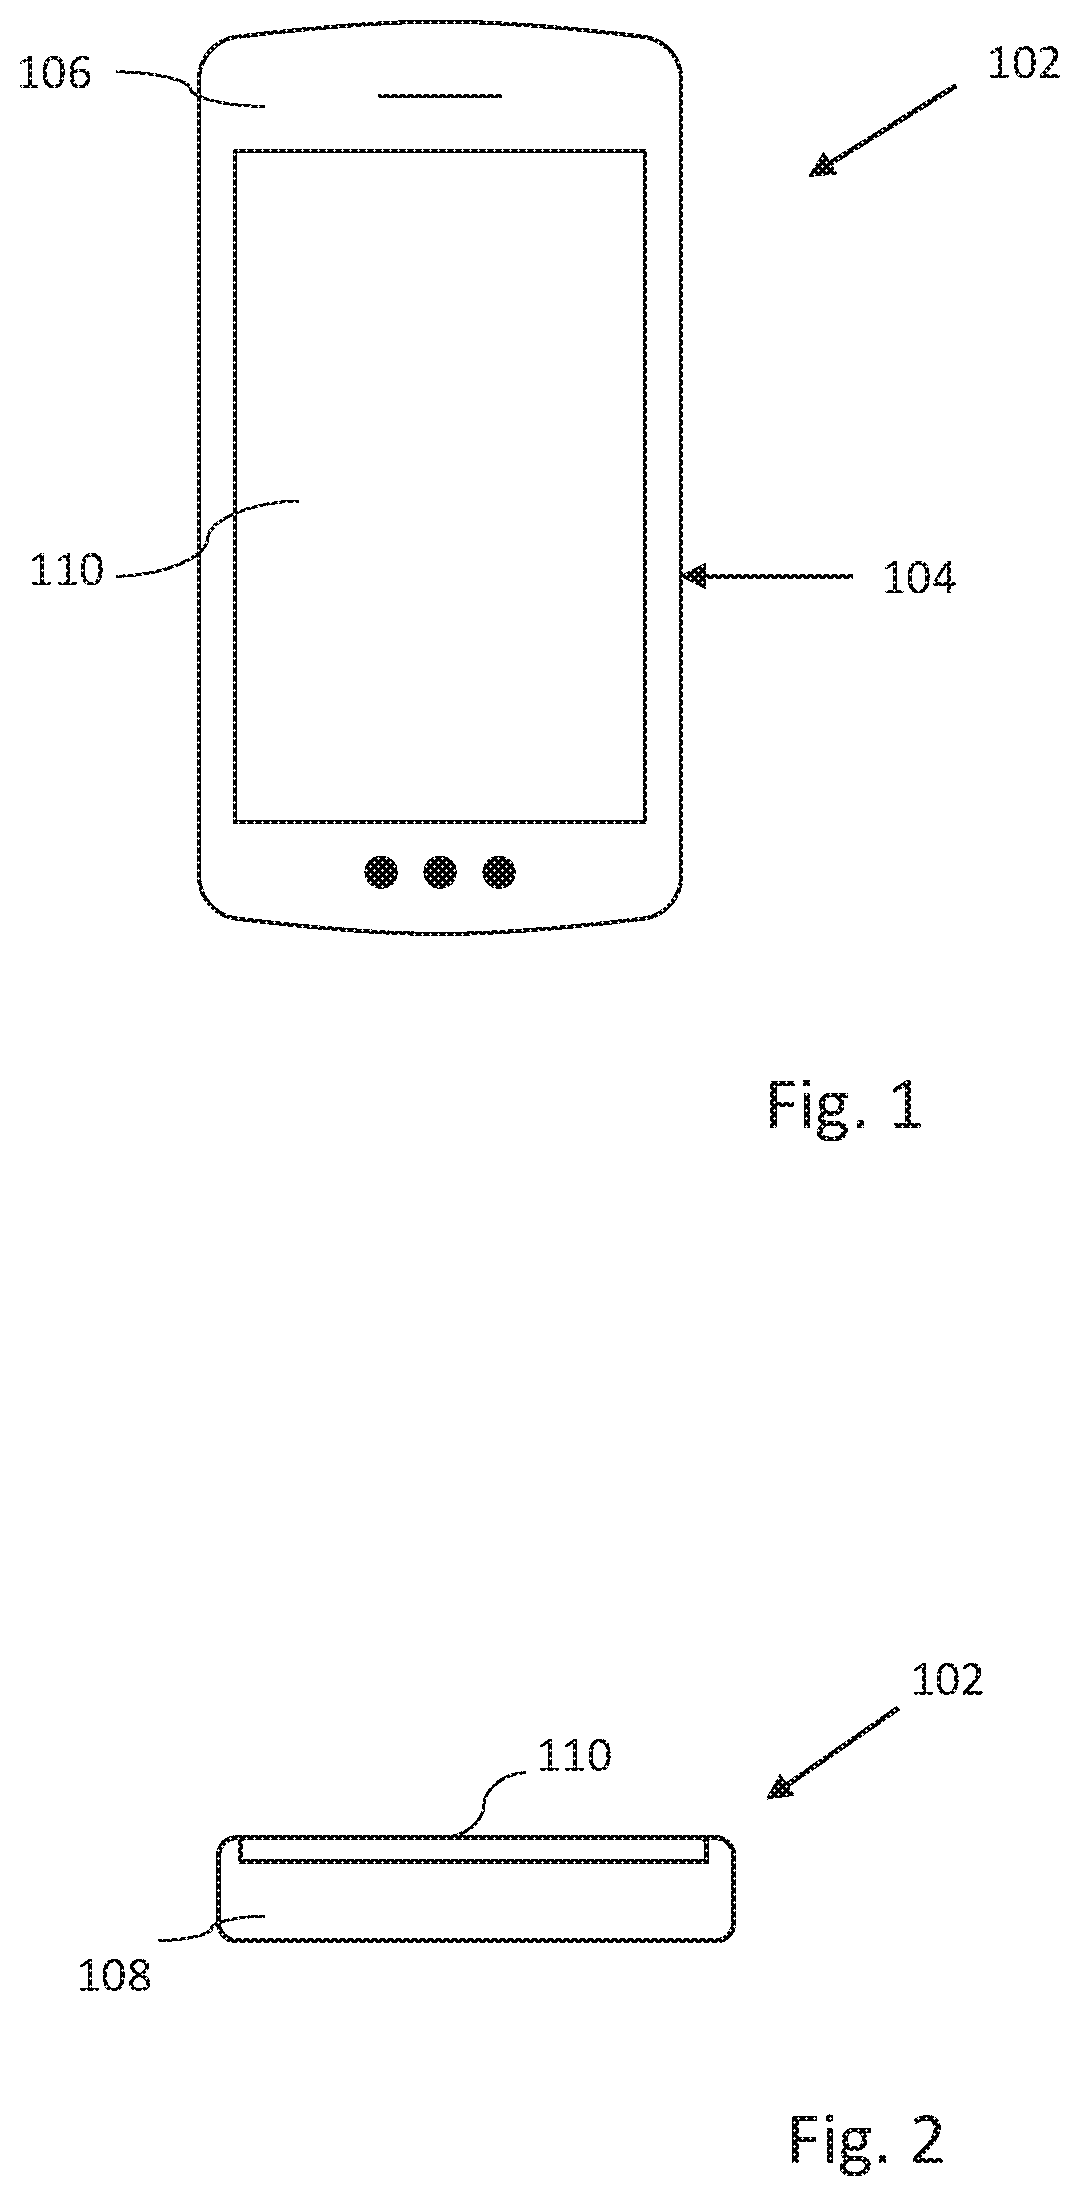 A communication device with a suspended display stack